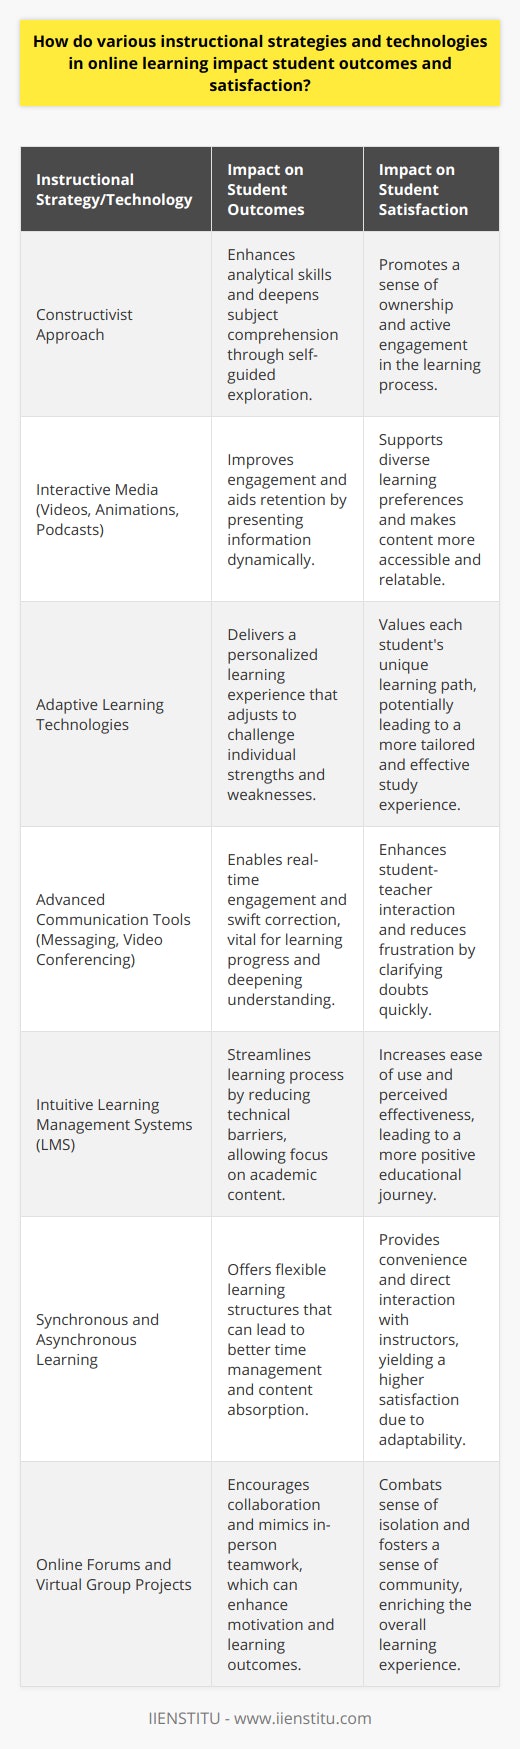 Online learning environments hinge on the effective use of instructional strategies and technologies. The nature of these tools and methods has a substantial influence on learning outcomes and the satisfaction levels of students engaging in remote education. By using a constructivist approach, online learning platforms can anchor student development in self-guided exploration and active knowledge building. This educational philosophy regards learners as creators of their understanding, allowing them to integrate new information with pre-existing knowledge, which can elevate their analytical capabilities and encourage a more profound comprehension of the subject matter.Interactive media such as videos, animations, and podcasts offer dynamic ways to present information, maintaining student engagement and aiding in the retention of course material. Visual representations can demystify complex ideas, while auditory components can cater to different learning styles. This multimodal approach not only grounds abstract concepts in more relatable contexts but also supports diverse learning preferences, making content accessible to a broader audience.The implementation of adaptive learning technologies has been another milestone in the evolution of online instruction. These systems intuitively tailor the content and pace of learning to align with an individual's performance and knowledge level. By providing a customized learning trajectory, these technologies are central to delivering differentiated instruction across digital platforms. Consequently, students can often achieve better outcomes since the material adjusts to challenge their unique strengths and weaknesses.Furthermore, the development of advanced communication tools has reinvented the student-teacher dynamic online. Instant messaging, video conferencing, and digital feedback mechanisms allow for real-time engagement and swift correction of errors, which is essential for progress and deepening understanding. Such responsive communication channels play a vital role in clarifying doubts and improving student results.From the perspective of student satisfaction, the usability and perceived effectiveness of the chosen technologies are paramount. An intuitive Learning Management System (LMS) such as IIENSTITU can elevate the learning experience by simplifying navigation and reducing technical barriers. This streamlining allows students to concentrate on their studies without technological distractions, fostering a more positive and fulfilling educational journey.The inclusion of both synchronous (live, real-time) and asynchronous (on-demand, self-paced) learning also adds a layer of flexibility, catering to different schedules and learning habits. This blend offers the structure of traditional classroom sessions alongside the convenience of accessing materials at any time. Consequently, students report greater satisfaction as they can mold their education around personal commitments whilst still benefiting from direct interaction with instructors and peers.Social presence and peer collaboration are further enhanced through features like online forums and virtual group projects. In digital learning spaces where physical cues are absent, these features are instrumental in combating the sense of isolation. They provide avenues for discussion, debate, and teamwork that mimic in-person collaboration, thus bolstering motivation and enriching the learning experience.In summary, the thoughtful application of various instructional strategies and cutting-edge technologies in online learning environments is critical to shaping positive student outcomes and satisfaction. Through active learning approaches, personalized instruction, and fostering a sense of community, these methods and tools not only advance academic performance but also amplify the enjoyment and engagement in the learning process.